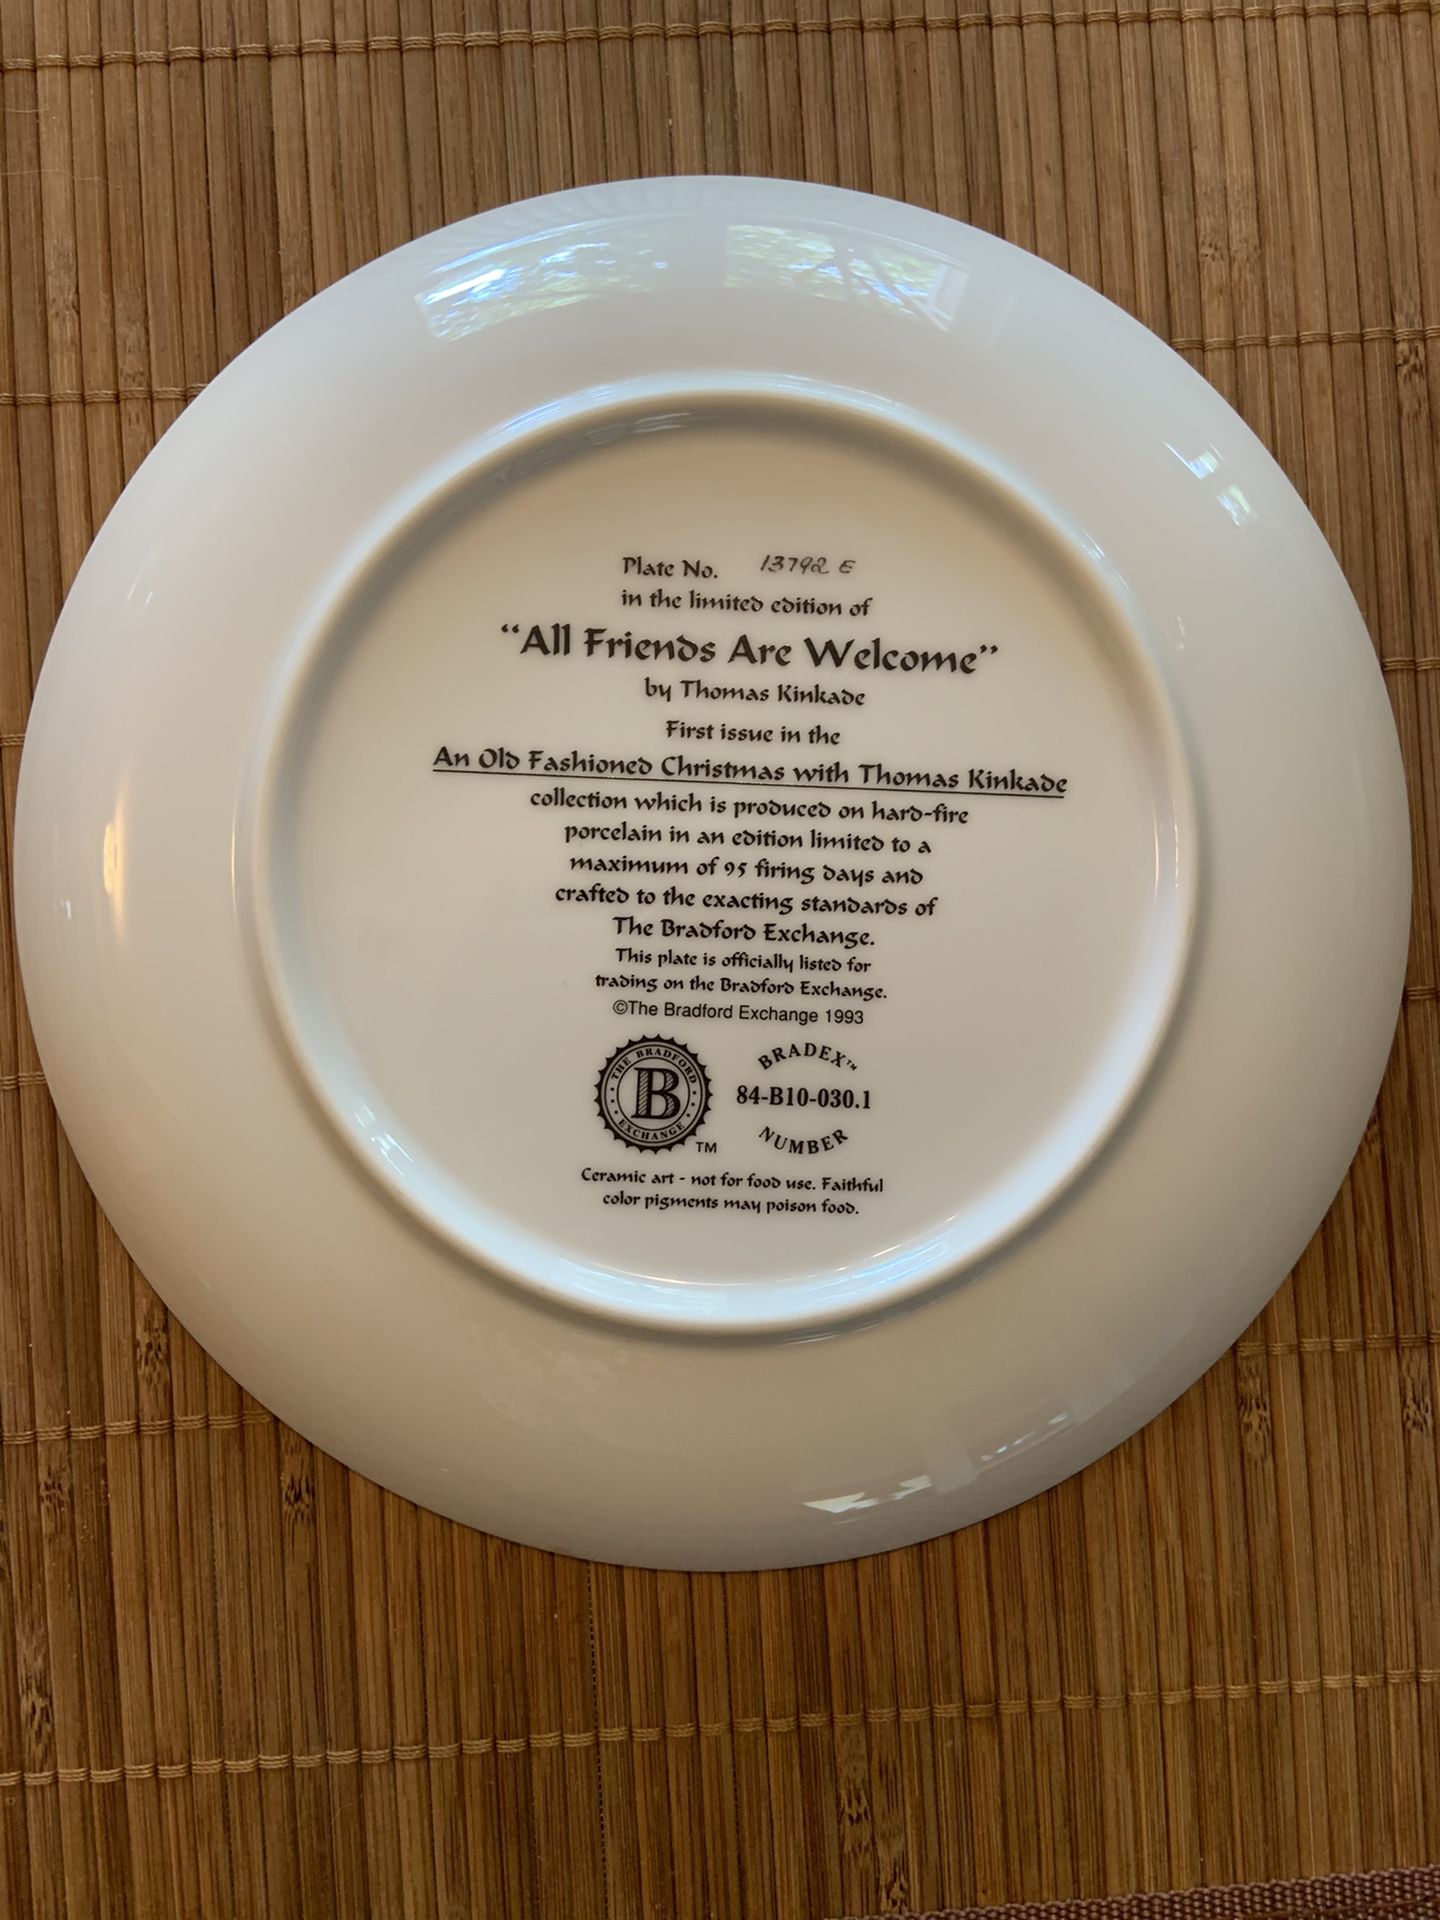 Thomas Kinkade Collectors Plate: All Friends Are Welcome